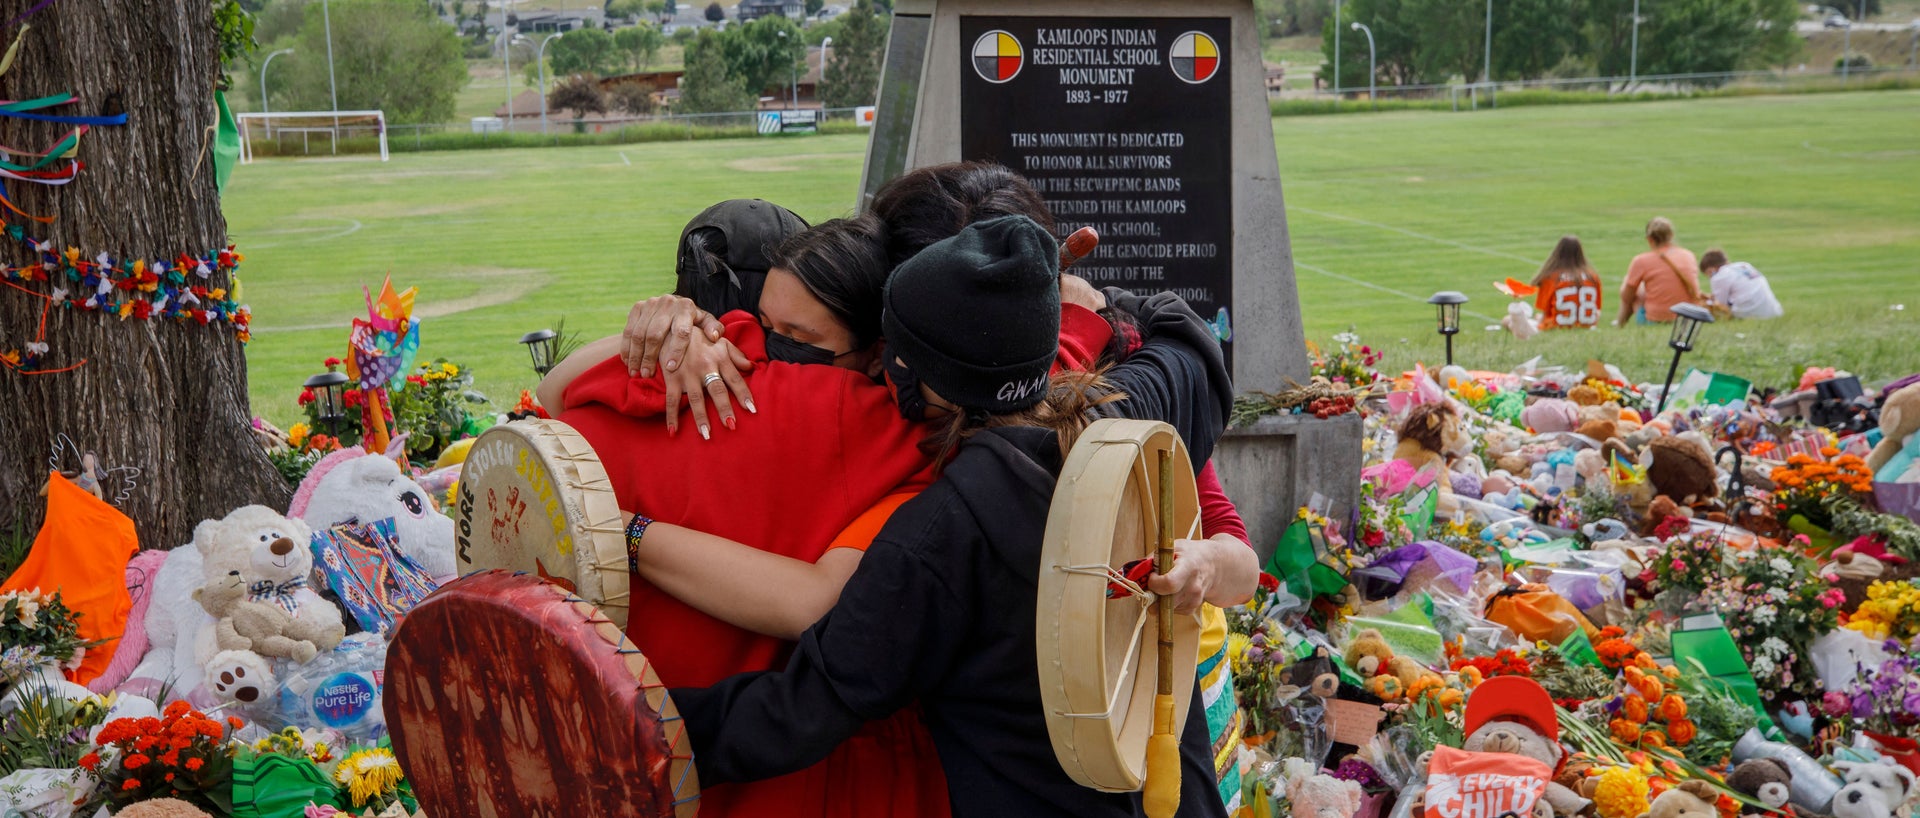 Tributes in front of the former Kamloops Residential School continue as the country grieves the 215 bodies of Indigenous children buried in a mass grave.